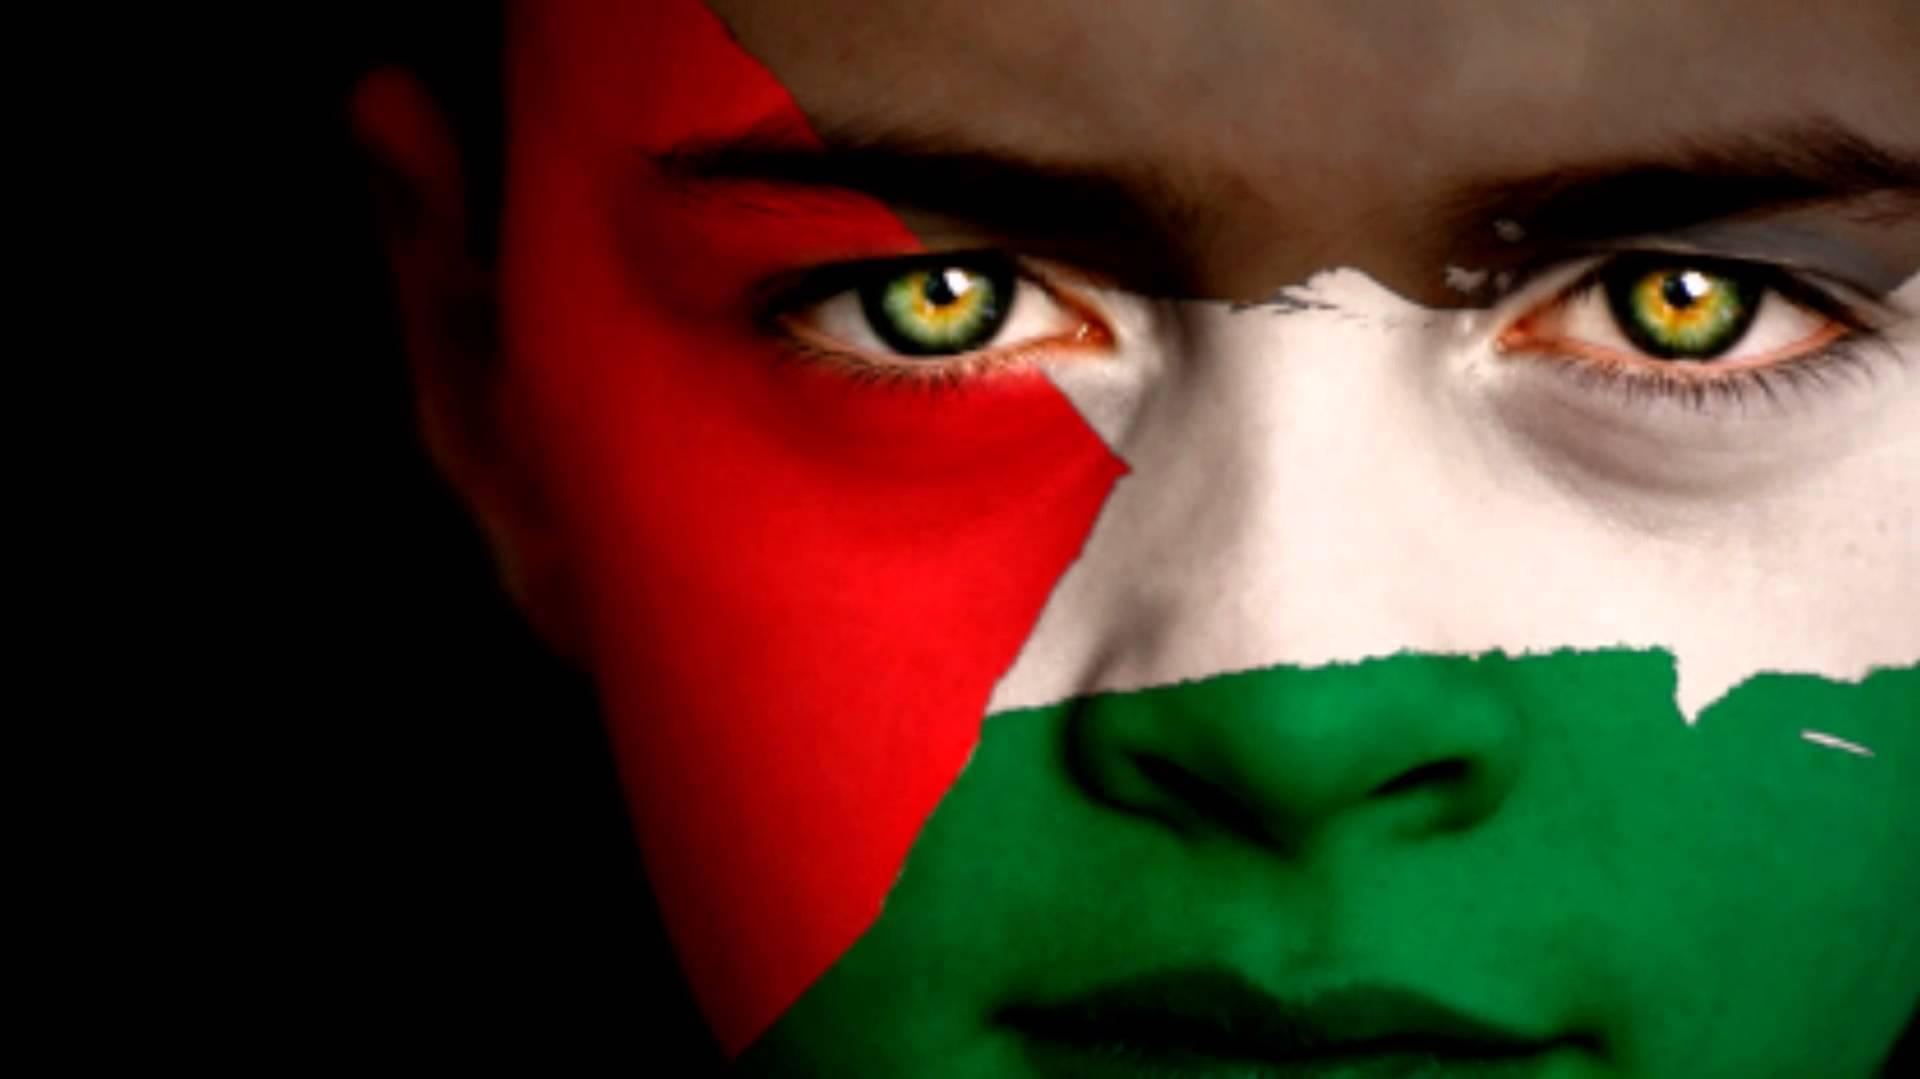 Passionate Supporter With Painted Palestine Flag On Face